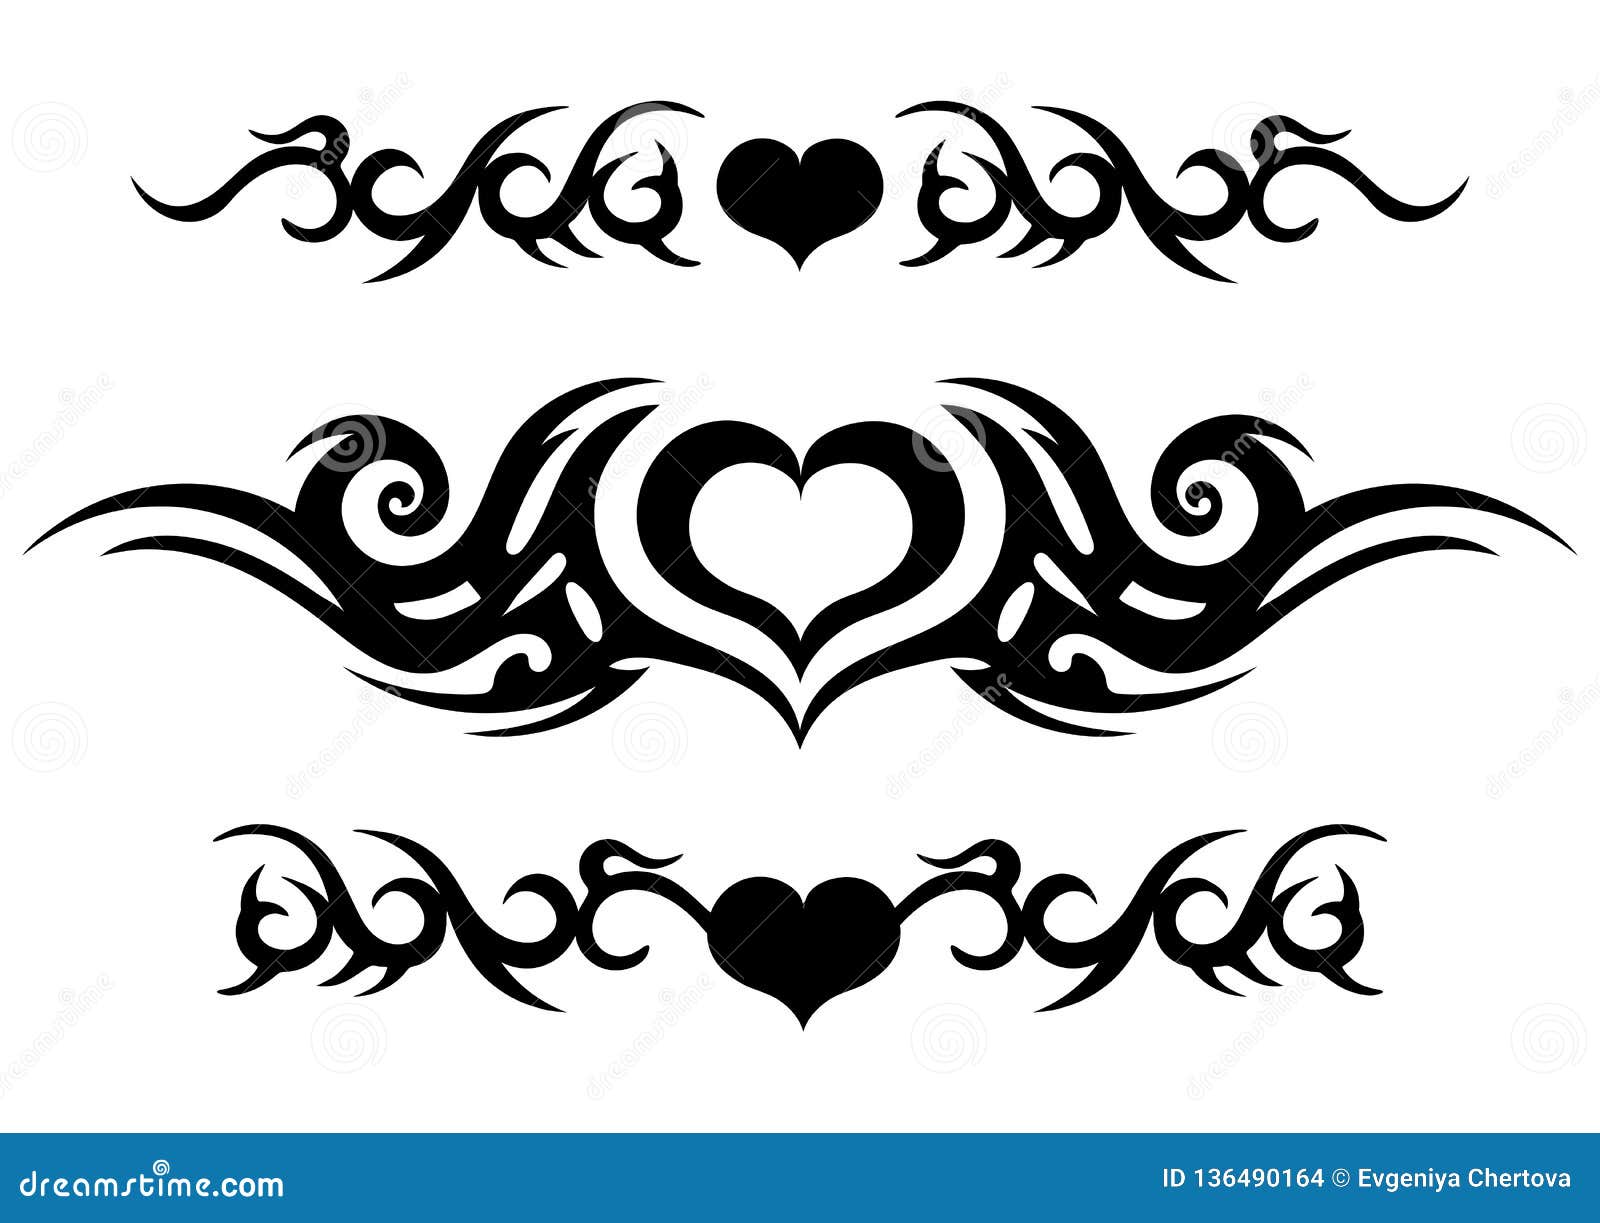 Tattoo Tribal Design, Ornate Celtic Pattern with Heart, Tattoo Strip Around the Arm or Leg, Abstract Print, Ornament Sketch, Vecto Stock Vector - Illustration of decorating, frame: 136490164